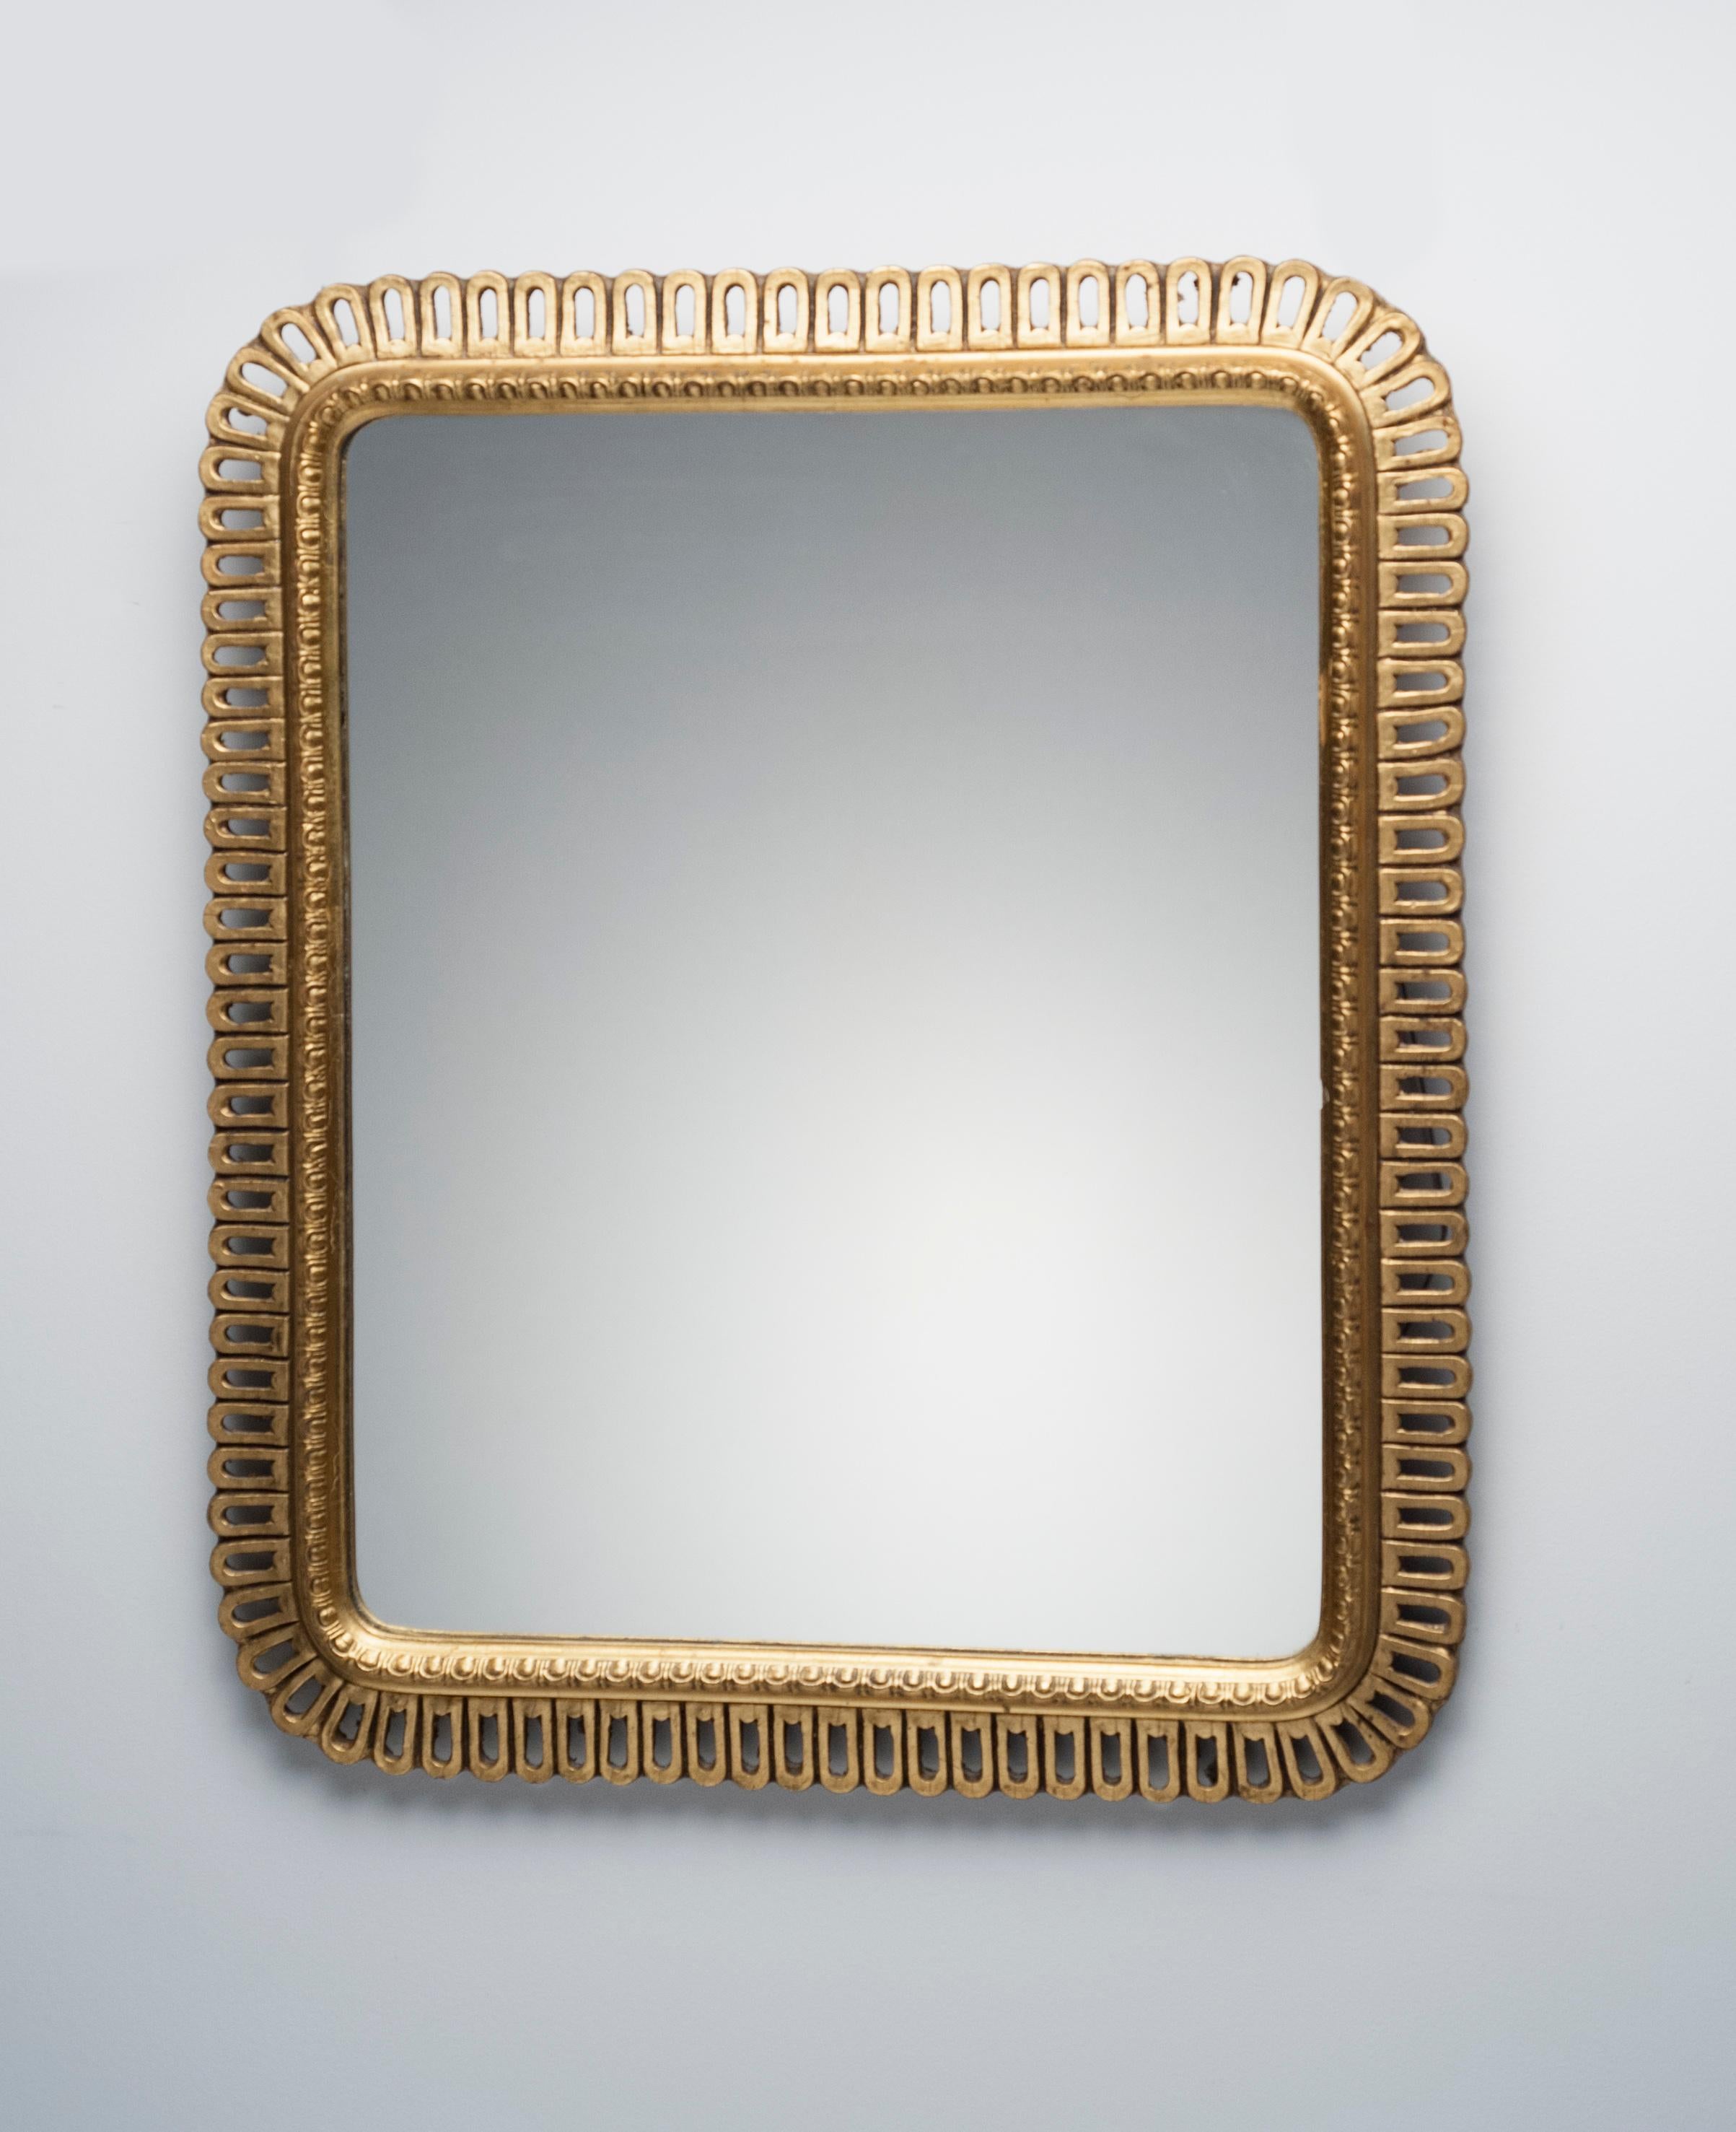 Beautifully made and appealing carved giltwood mirror. Mirror dates to the 1950s or possibly earlier. Mirror is wired to hang either vertically or horizontally.